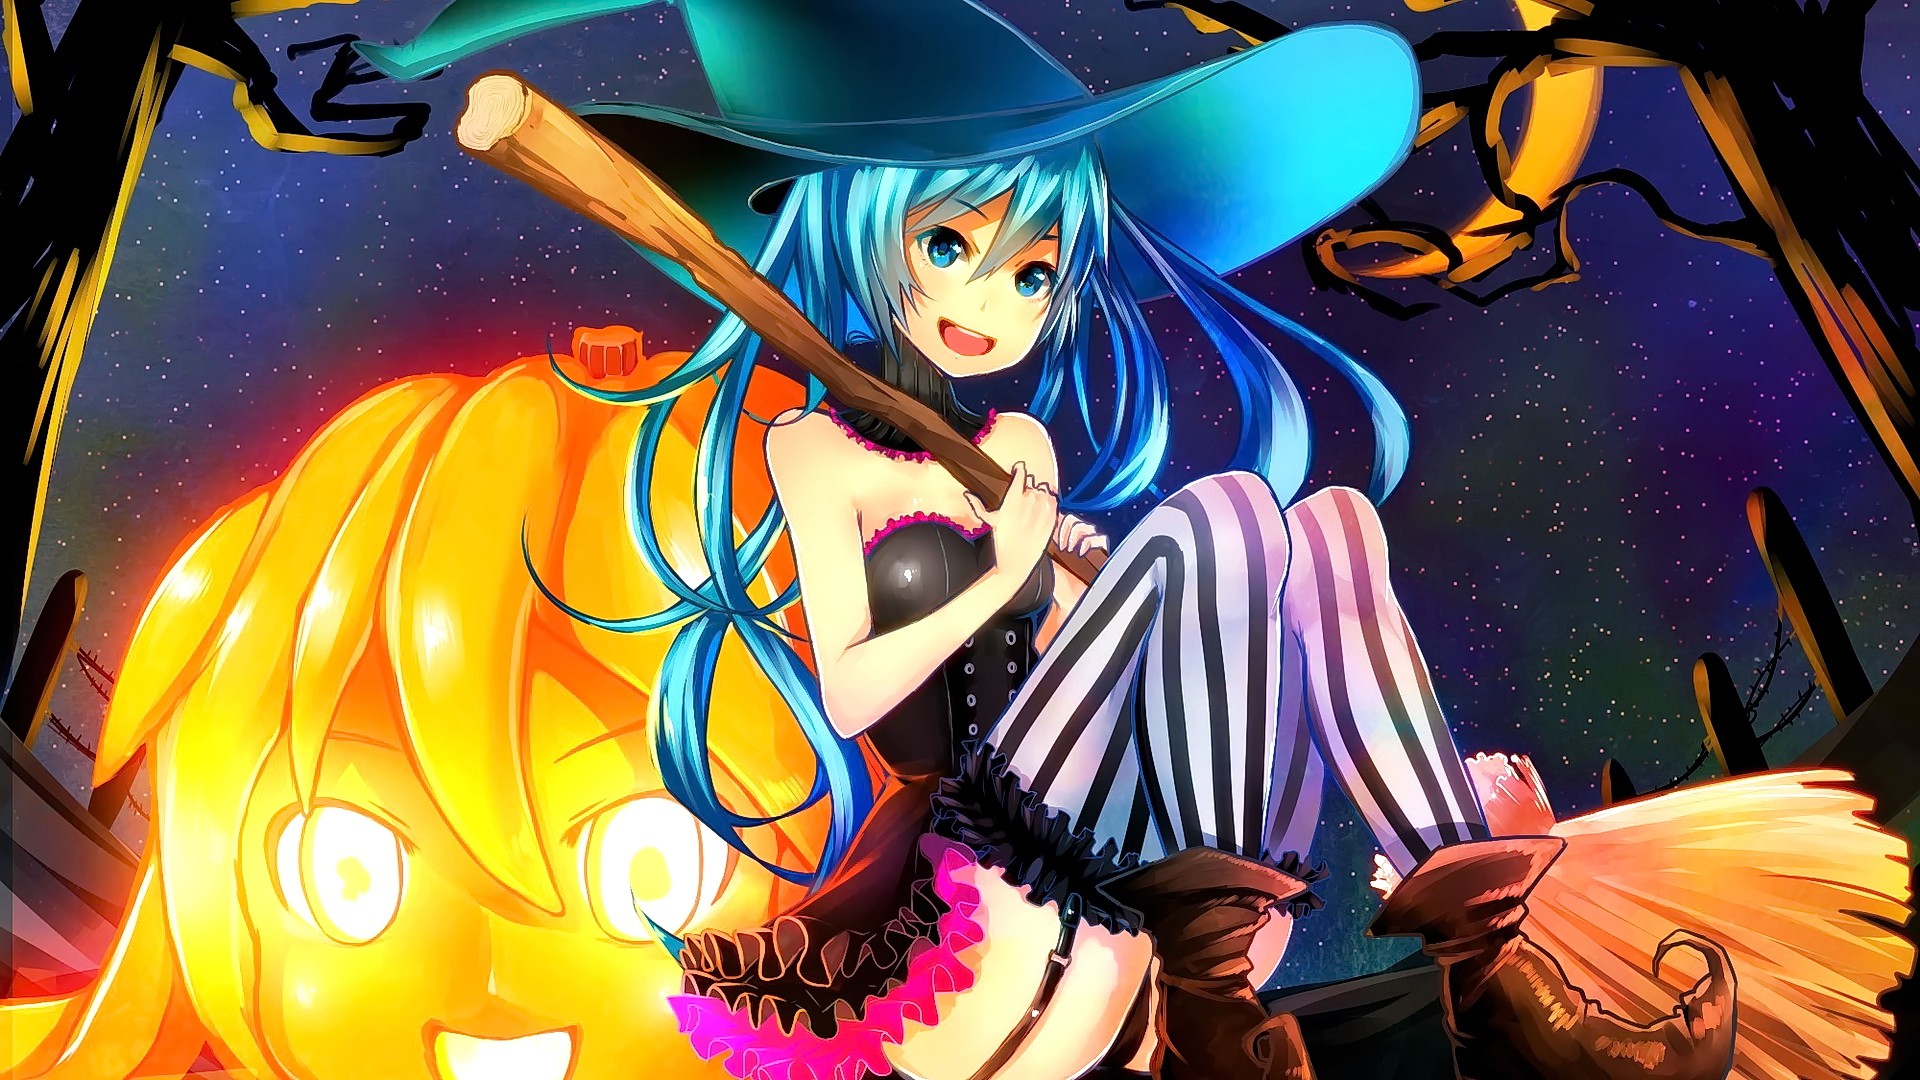 Anime 1920x1080 anime anime girls cyan hair long hair hat looking at viewer smiling witch Vocaloid Hatsune Miku Halloween witch hat stockings striped stockings open mouth broom lingerie